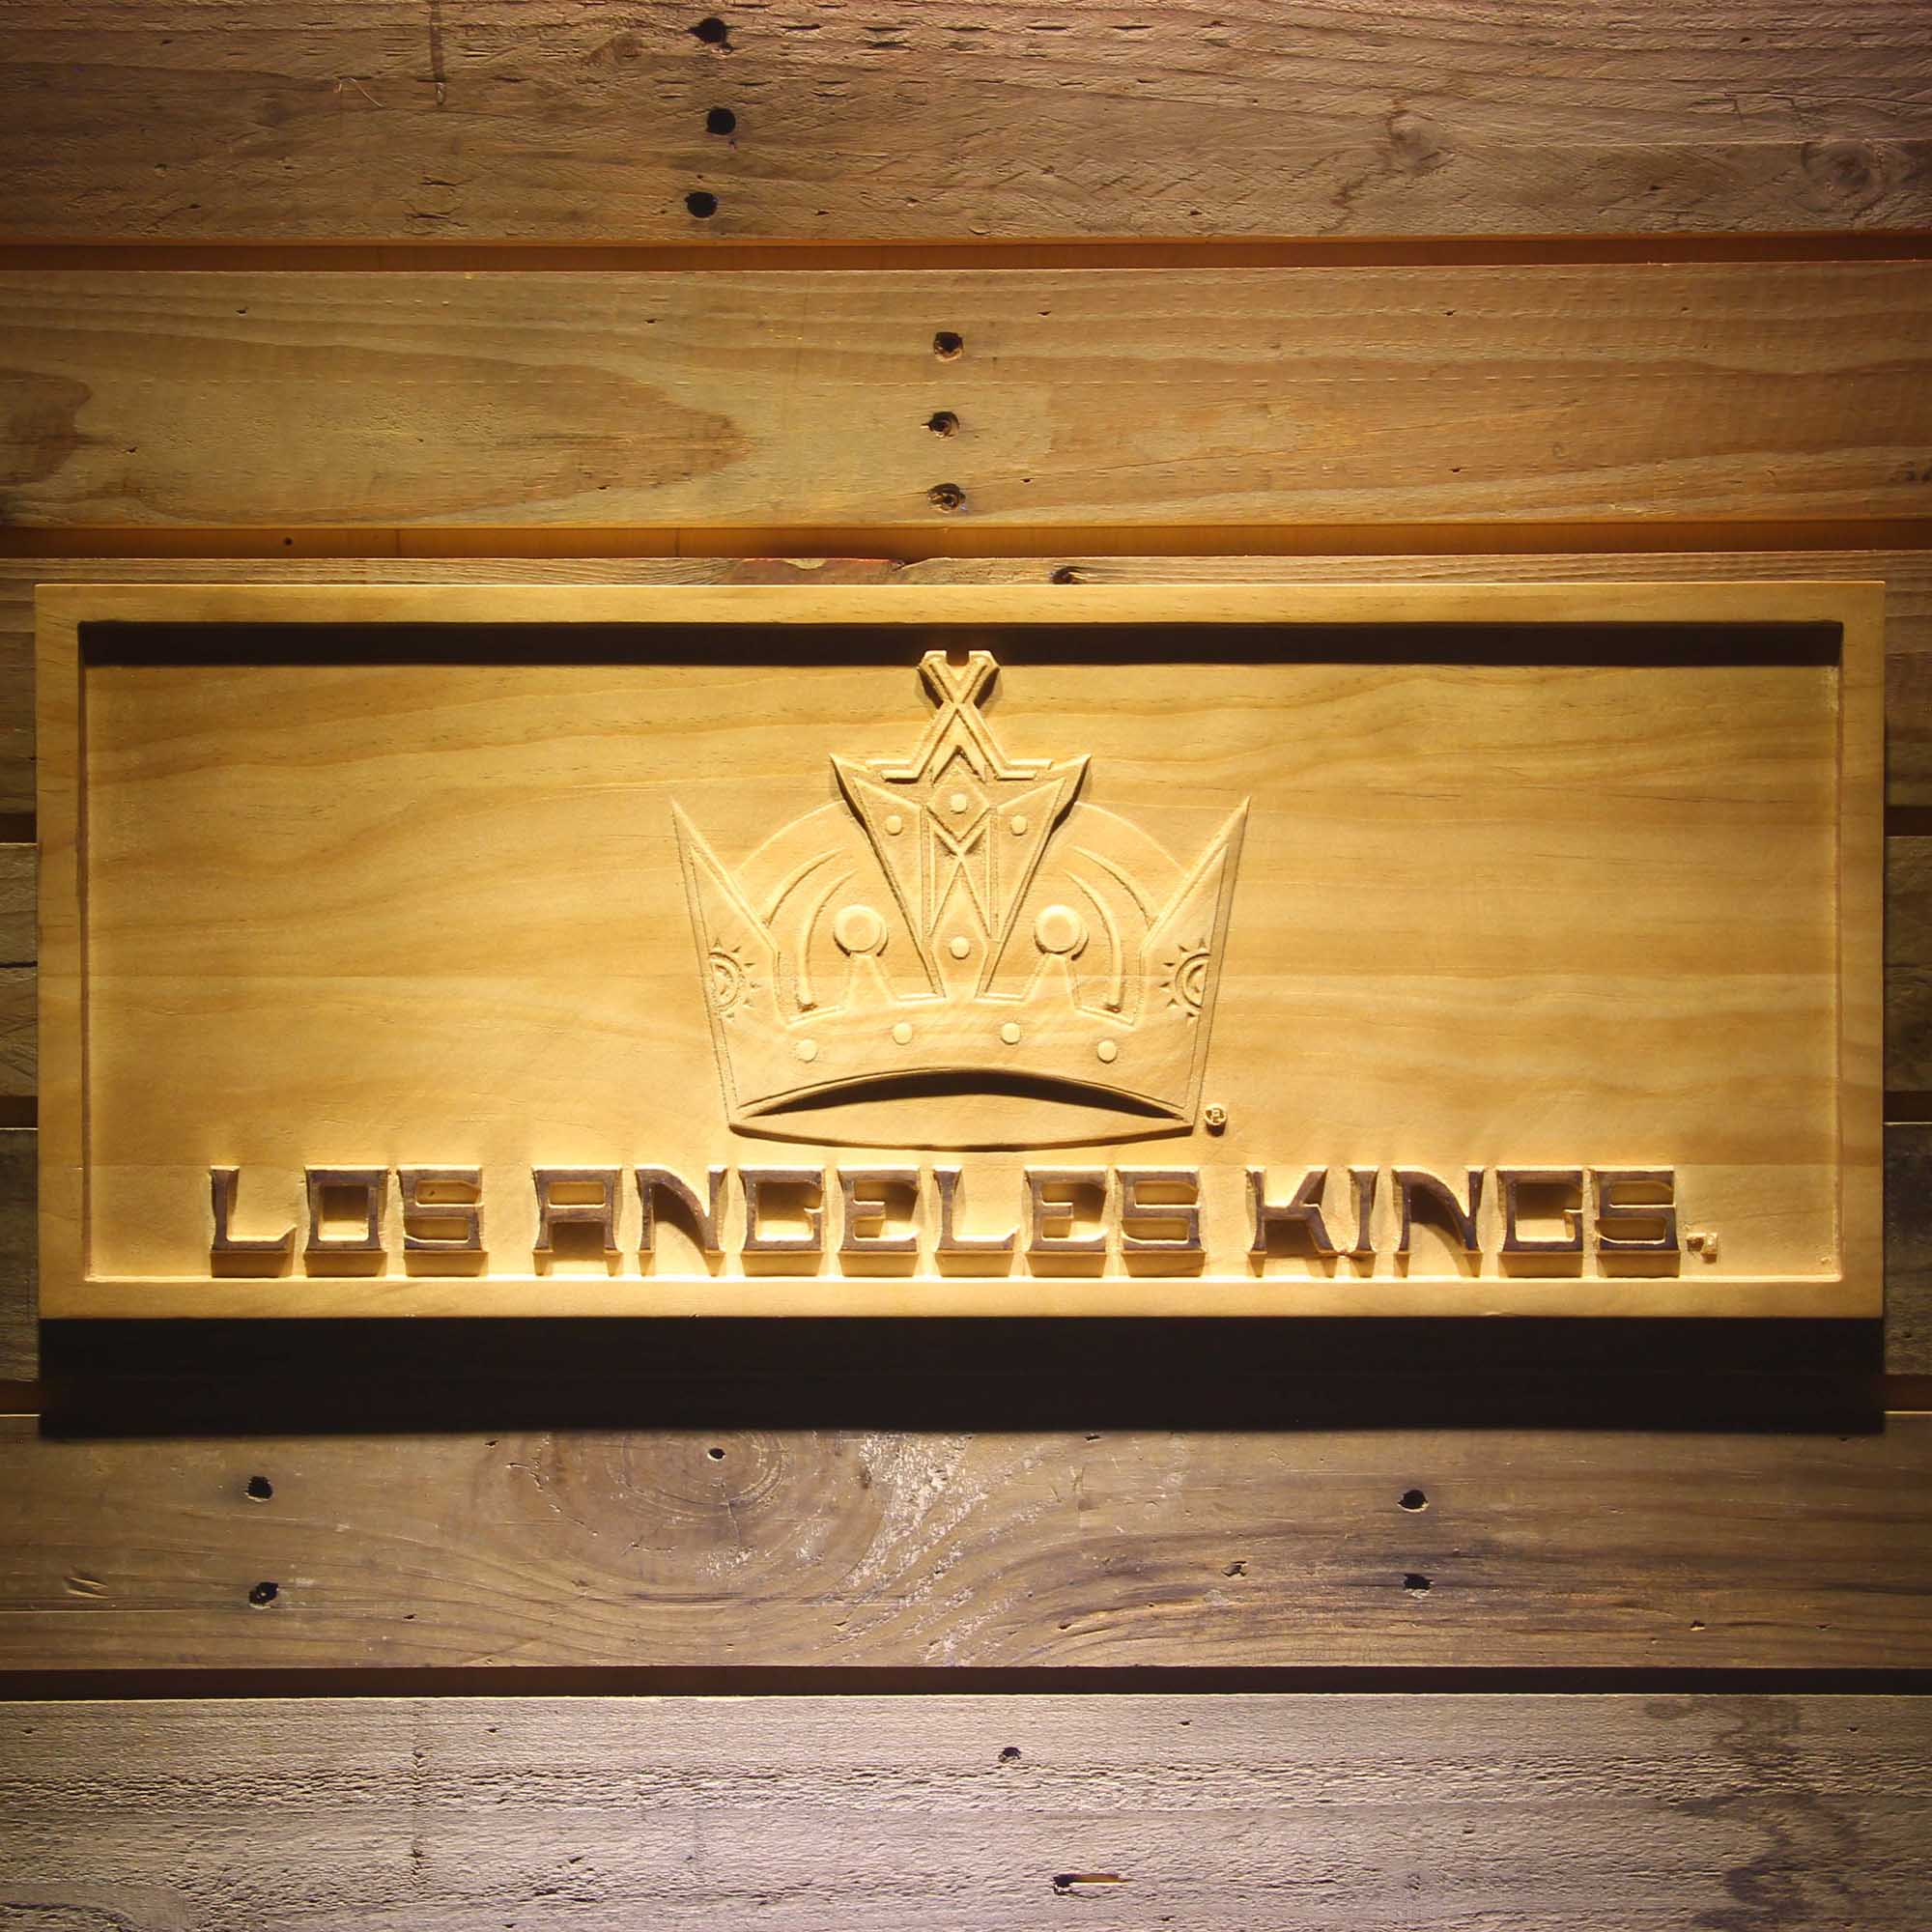 Los Angeles Kings Hockey Man Cave Sport 3D Wooden Engrave Sign